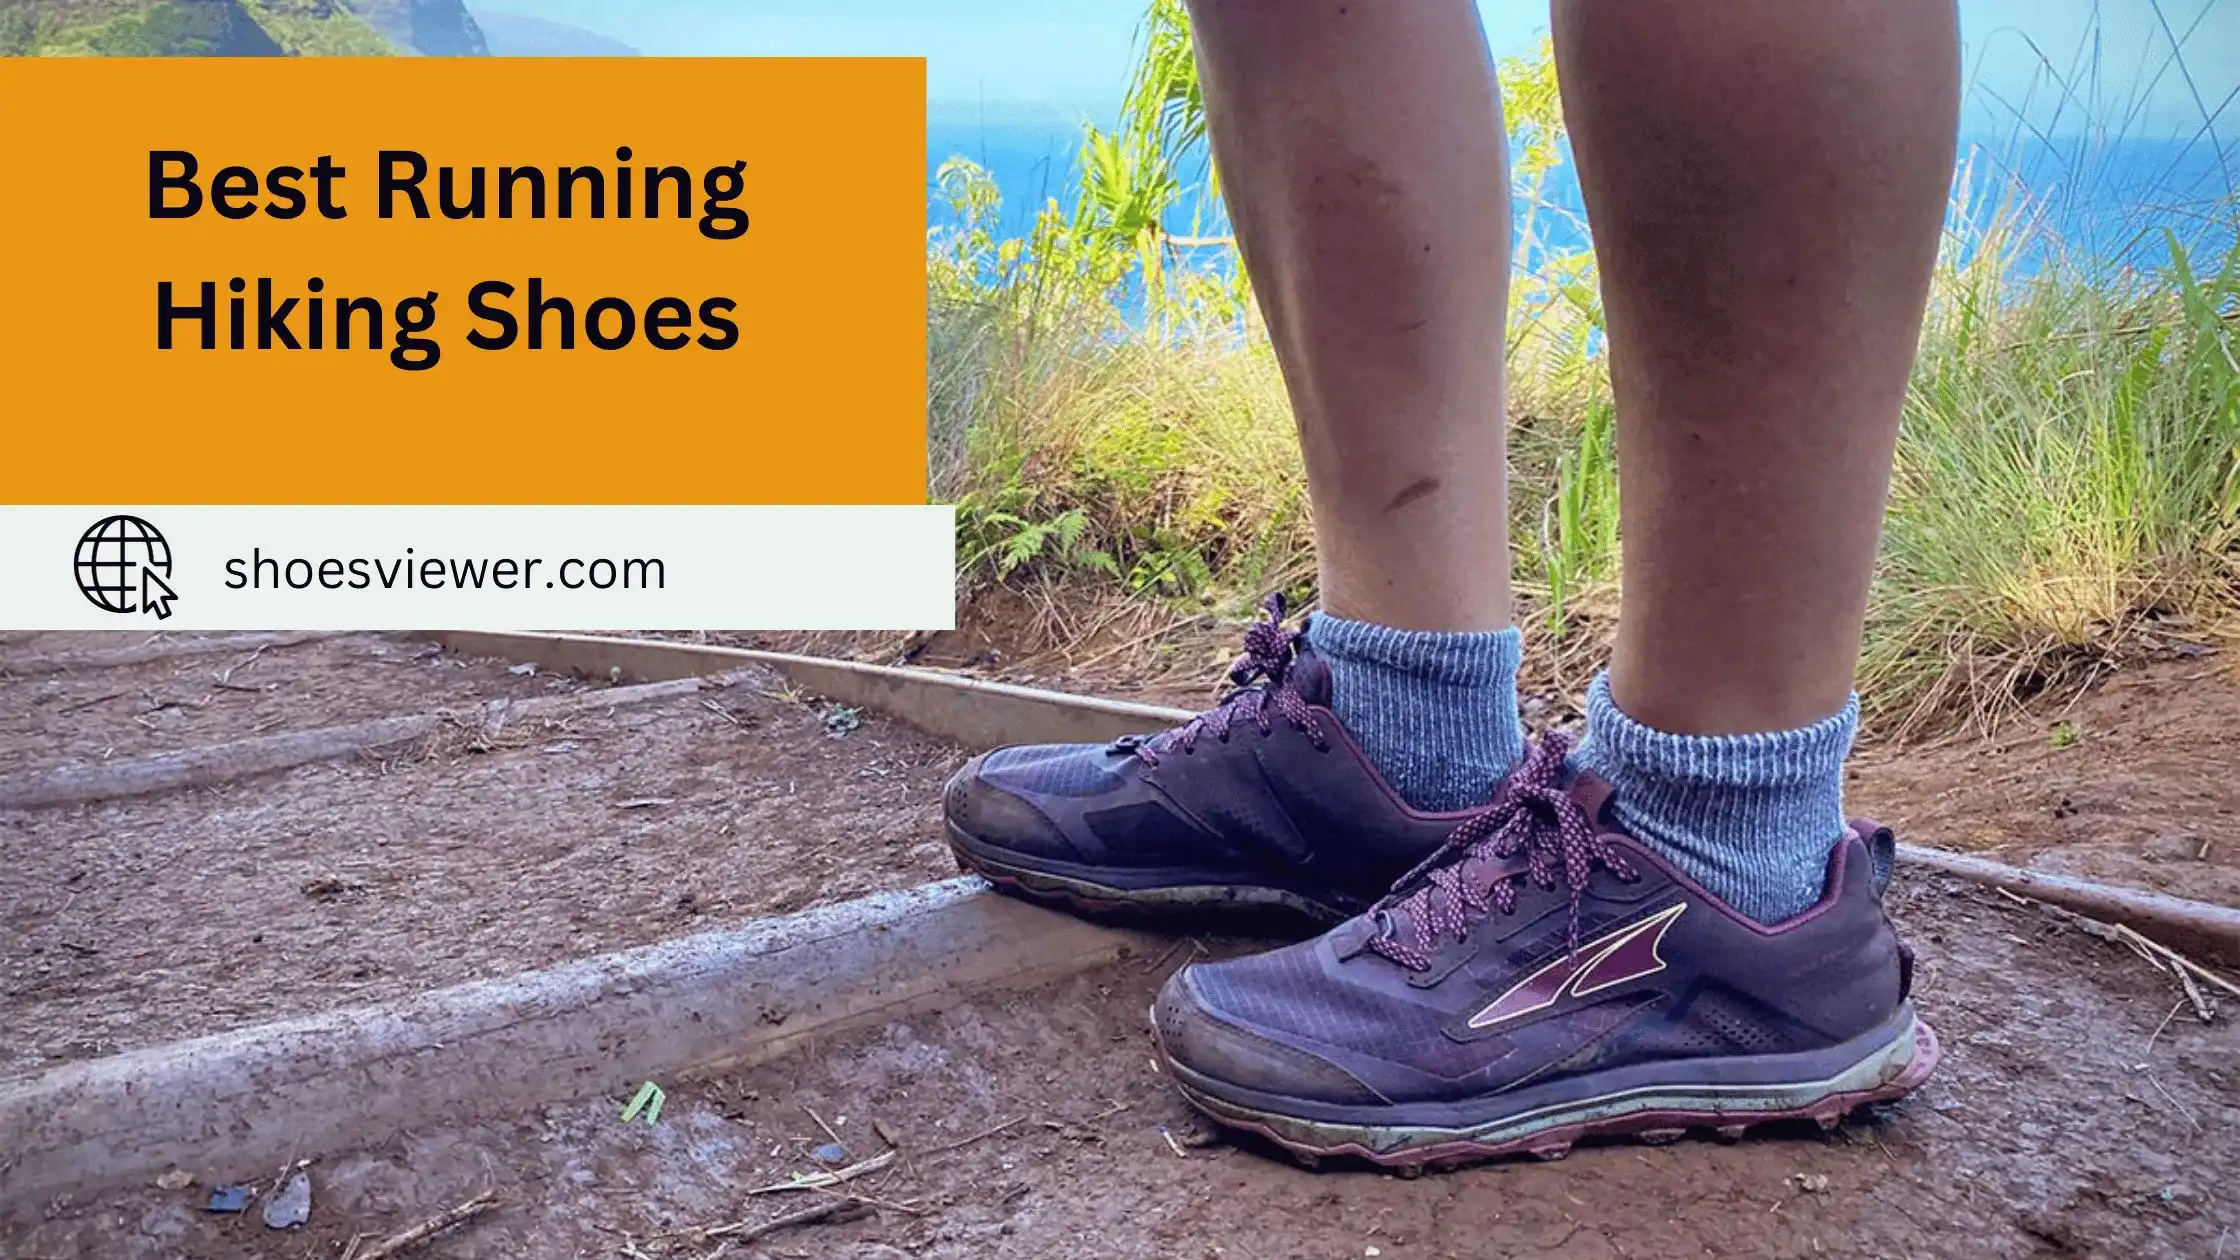 Best Running Hiking Shoes - A Comprehensive Guide